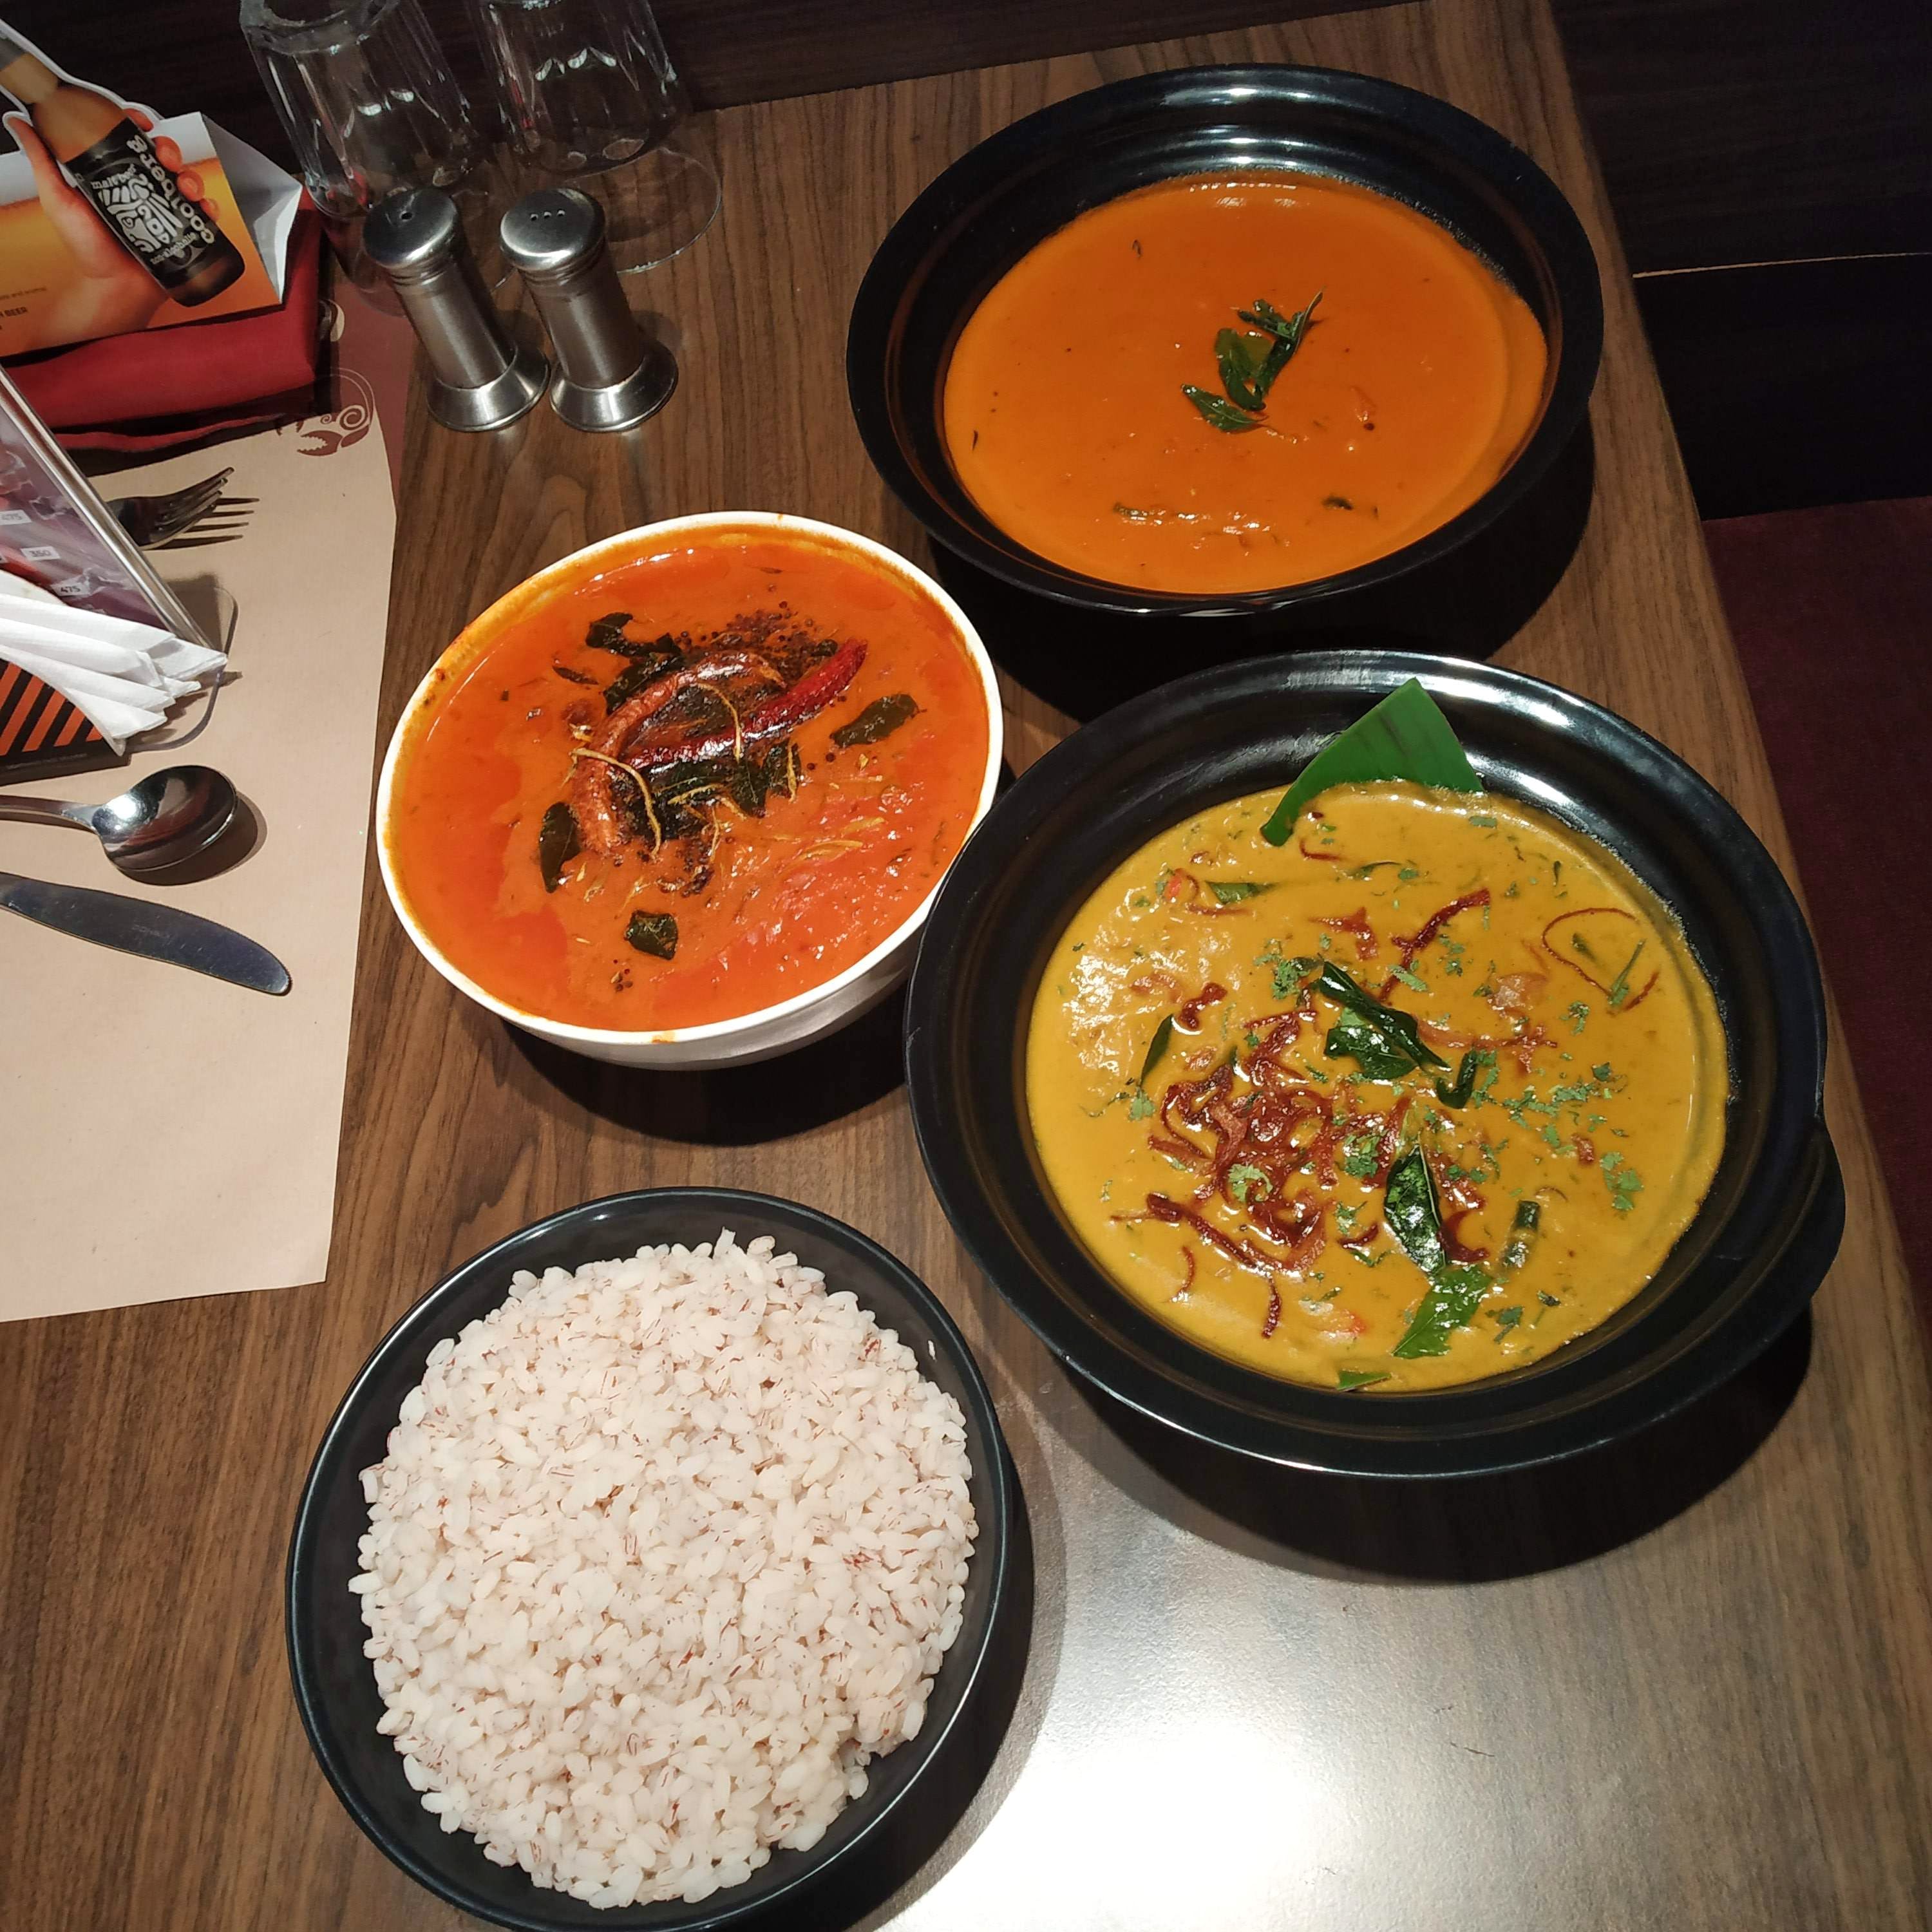 Dish,Food,Cuisine,Curry,Ingredient,Red curry,Bisque,Kadhi,Meal,Lunch